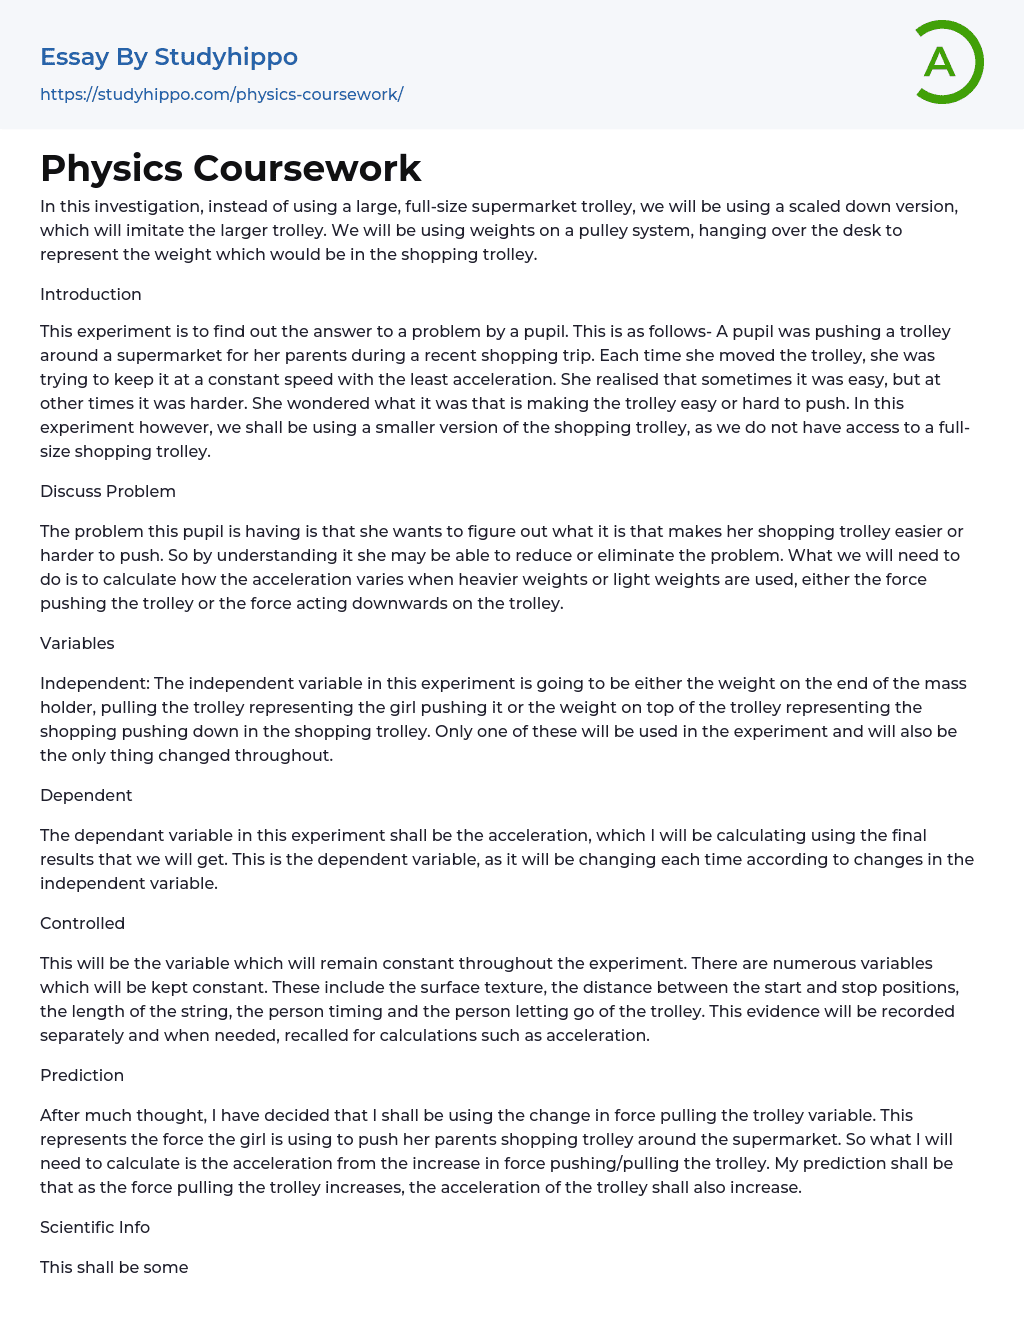 Physics Coursework Essay Example